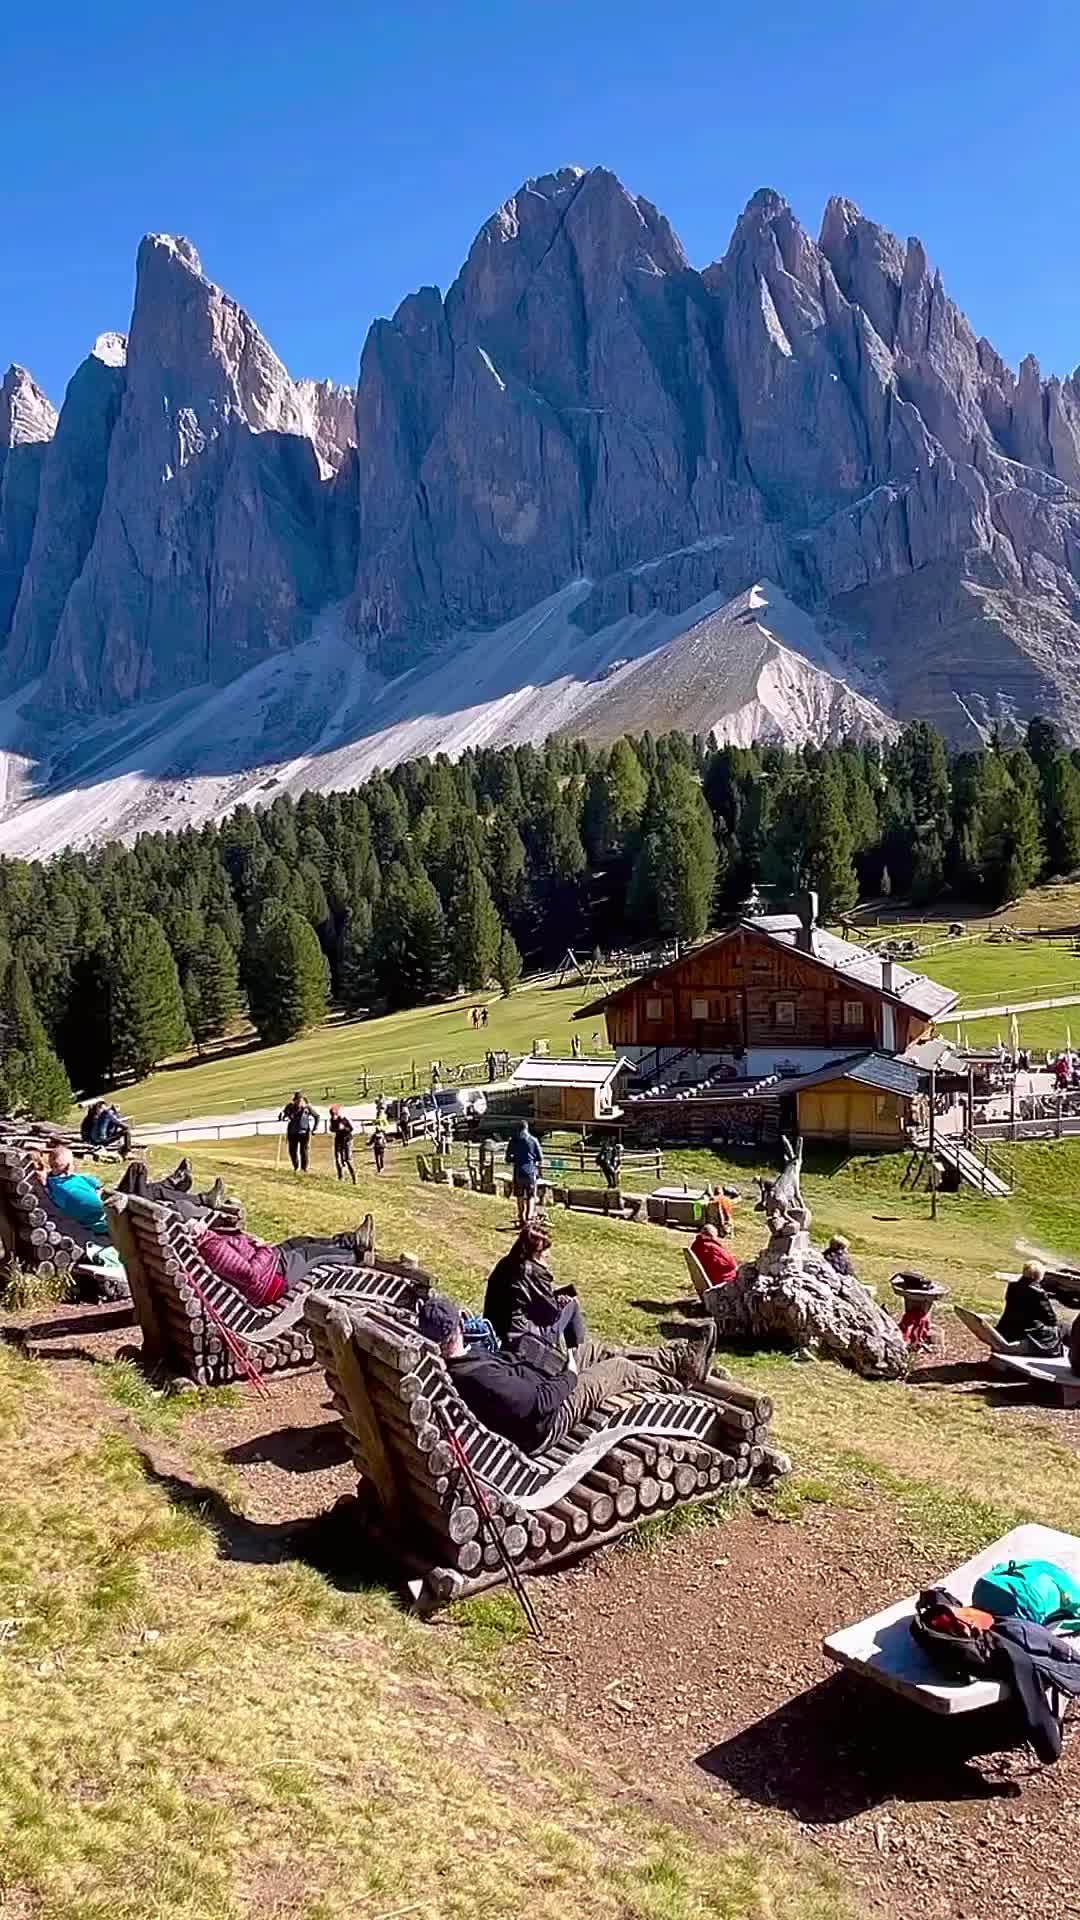 Breathtaking Dolomites Scenery: A Ride to Remember